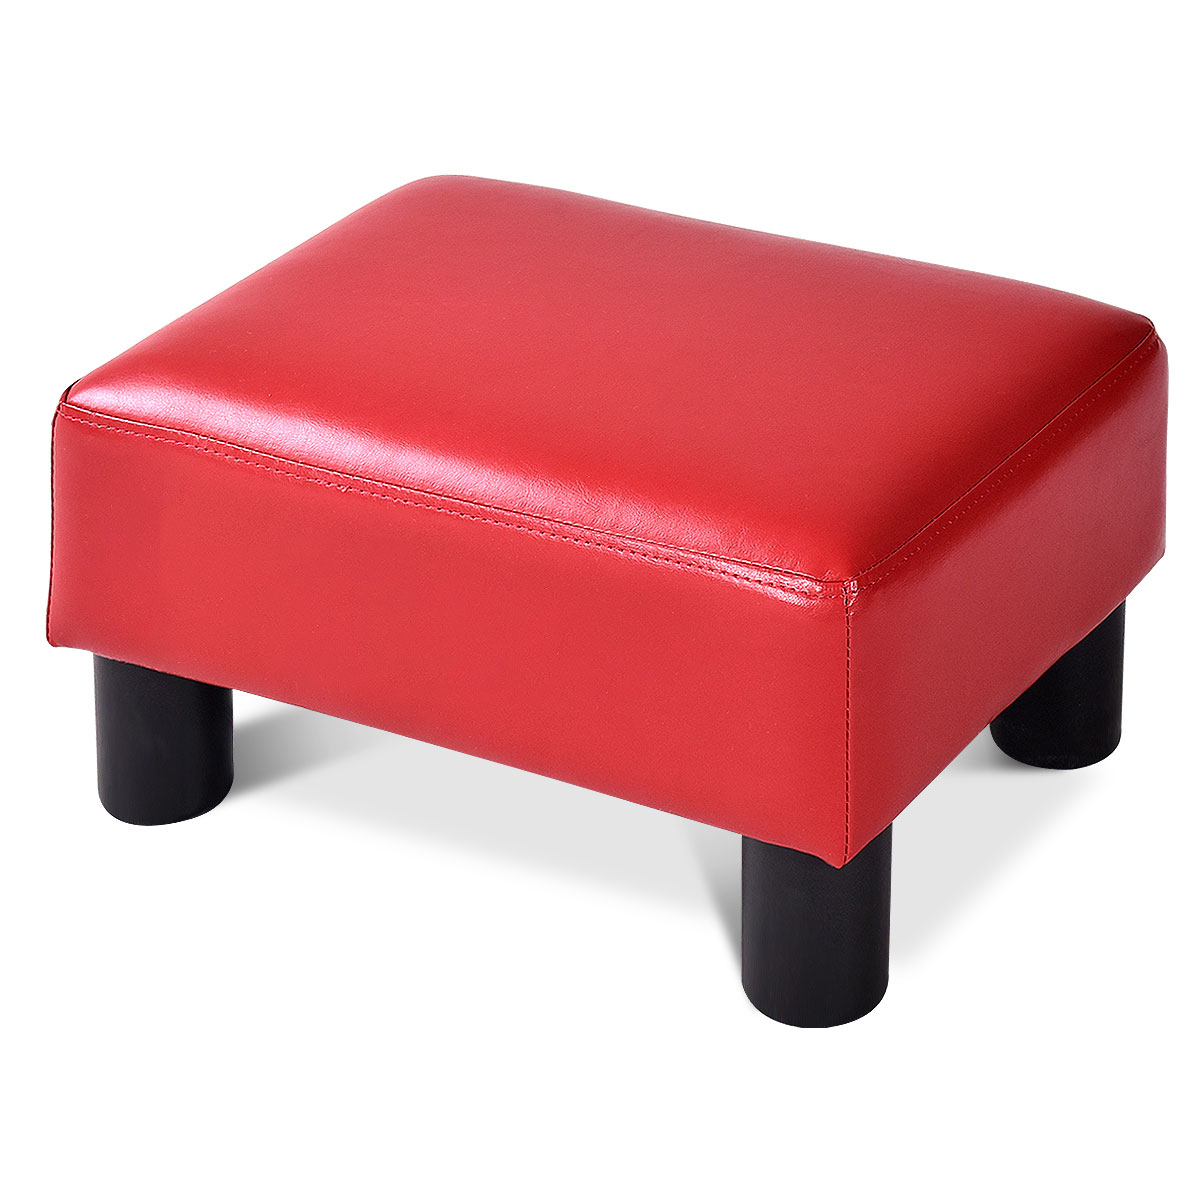 PU Leather Ottoman Rectangular Footrest Small Stool Black/Red/White - Red